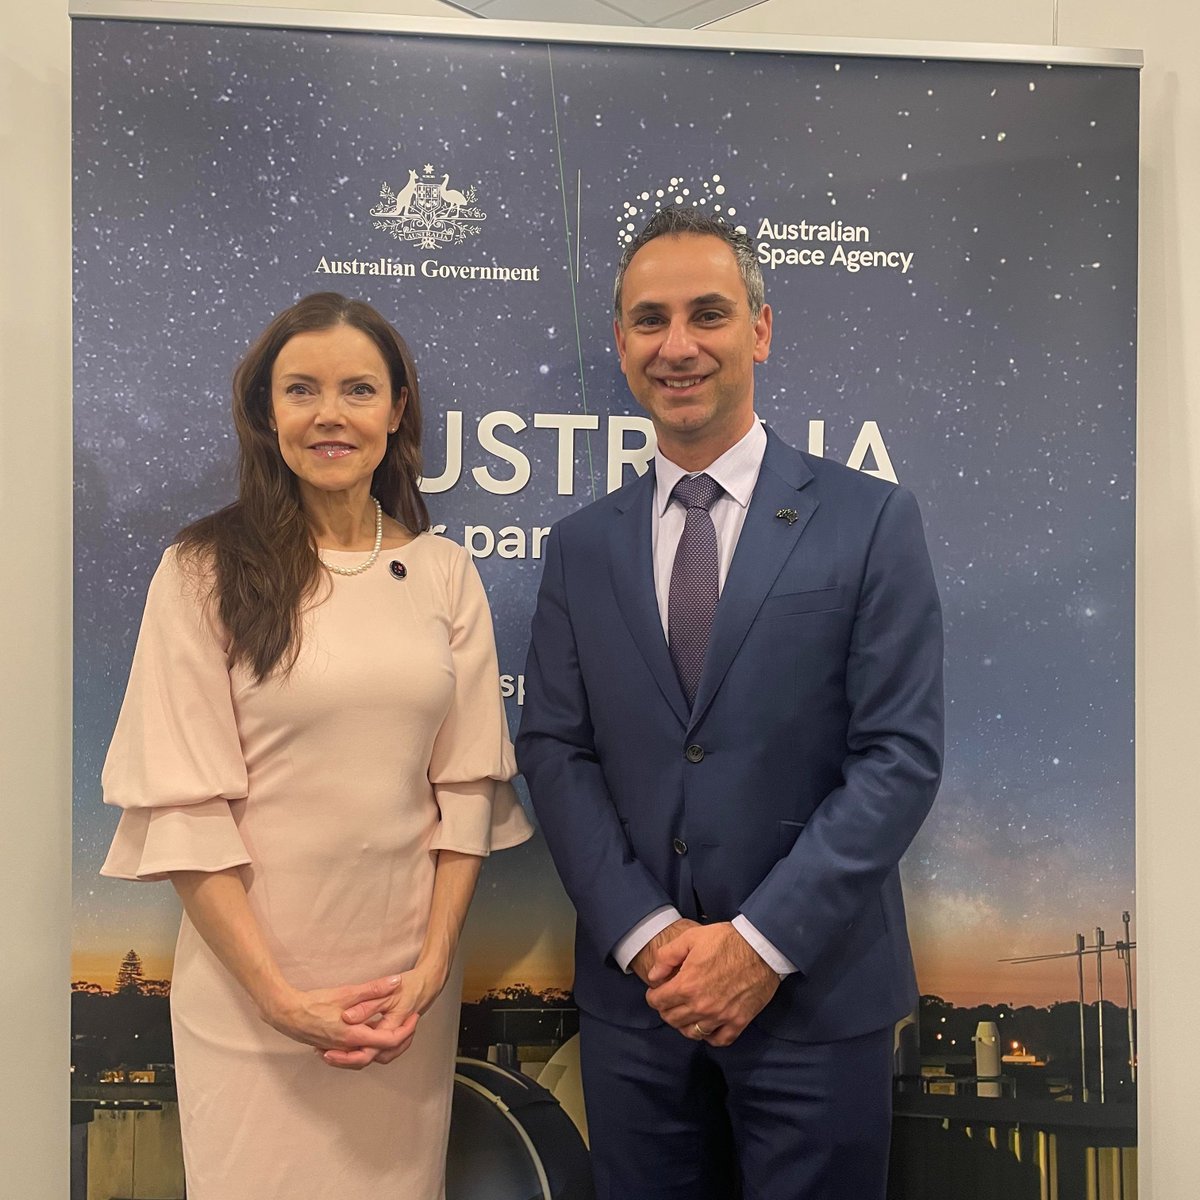 .@AusSpaceAgency and the CSA share a close partnership underpinned by shared priorities in the future of deep space exploration, Earth observation and space sustainability. We are honoured to extend this relationship through renewing our collaborative MOU. New horizons await!